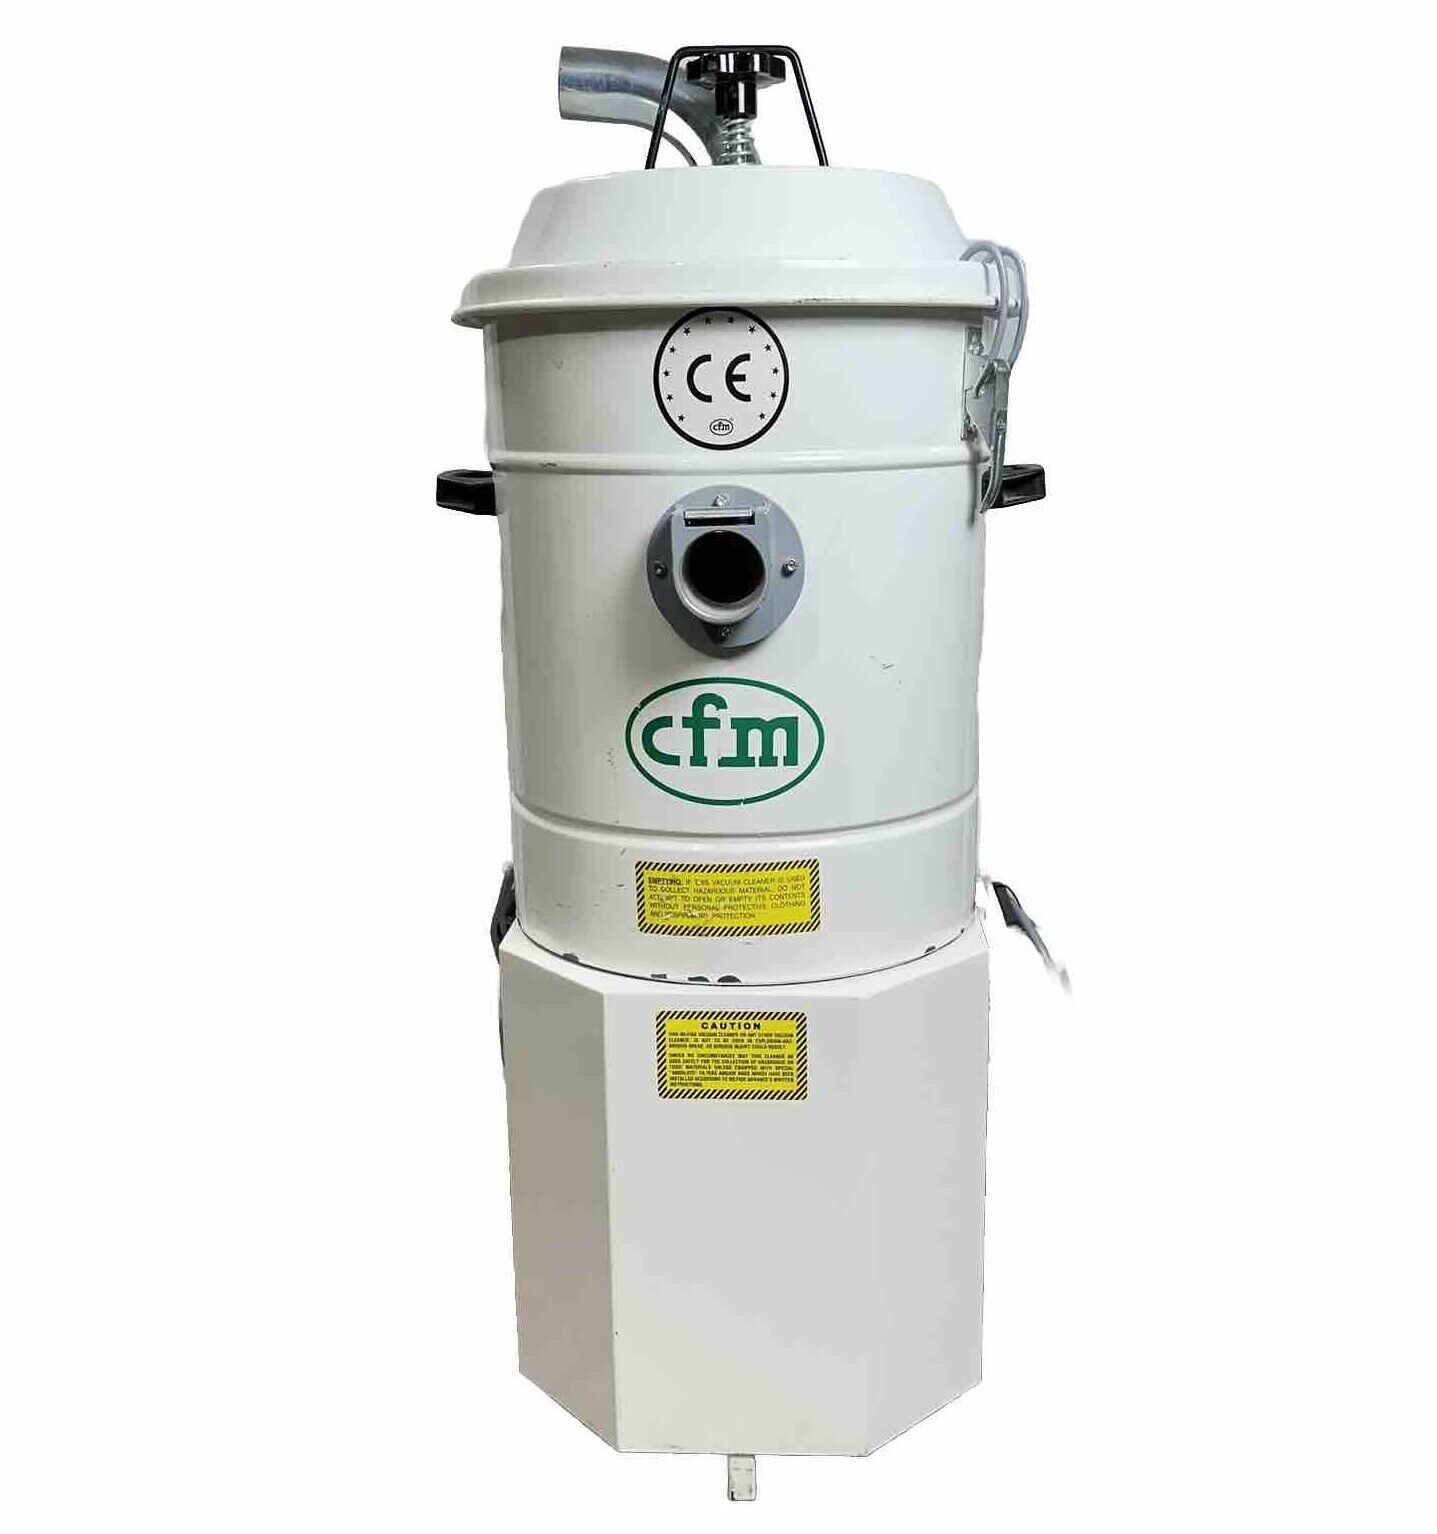 Nilfisk CFM 3151 Industrial Vacuum Small Particle Dust Collection 1-3 Phase 6 Gl